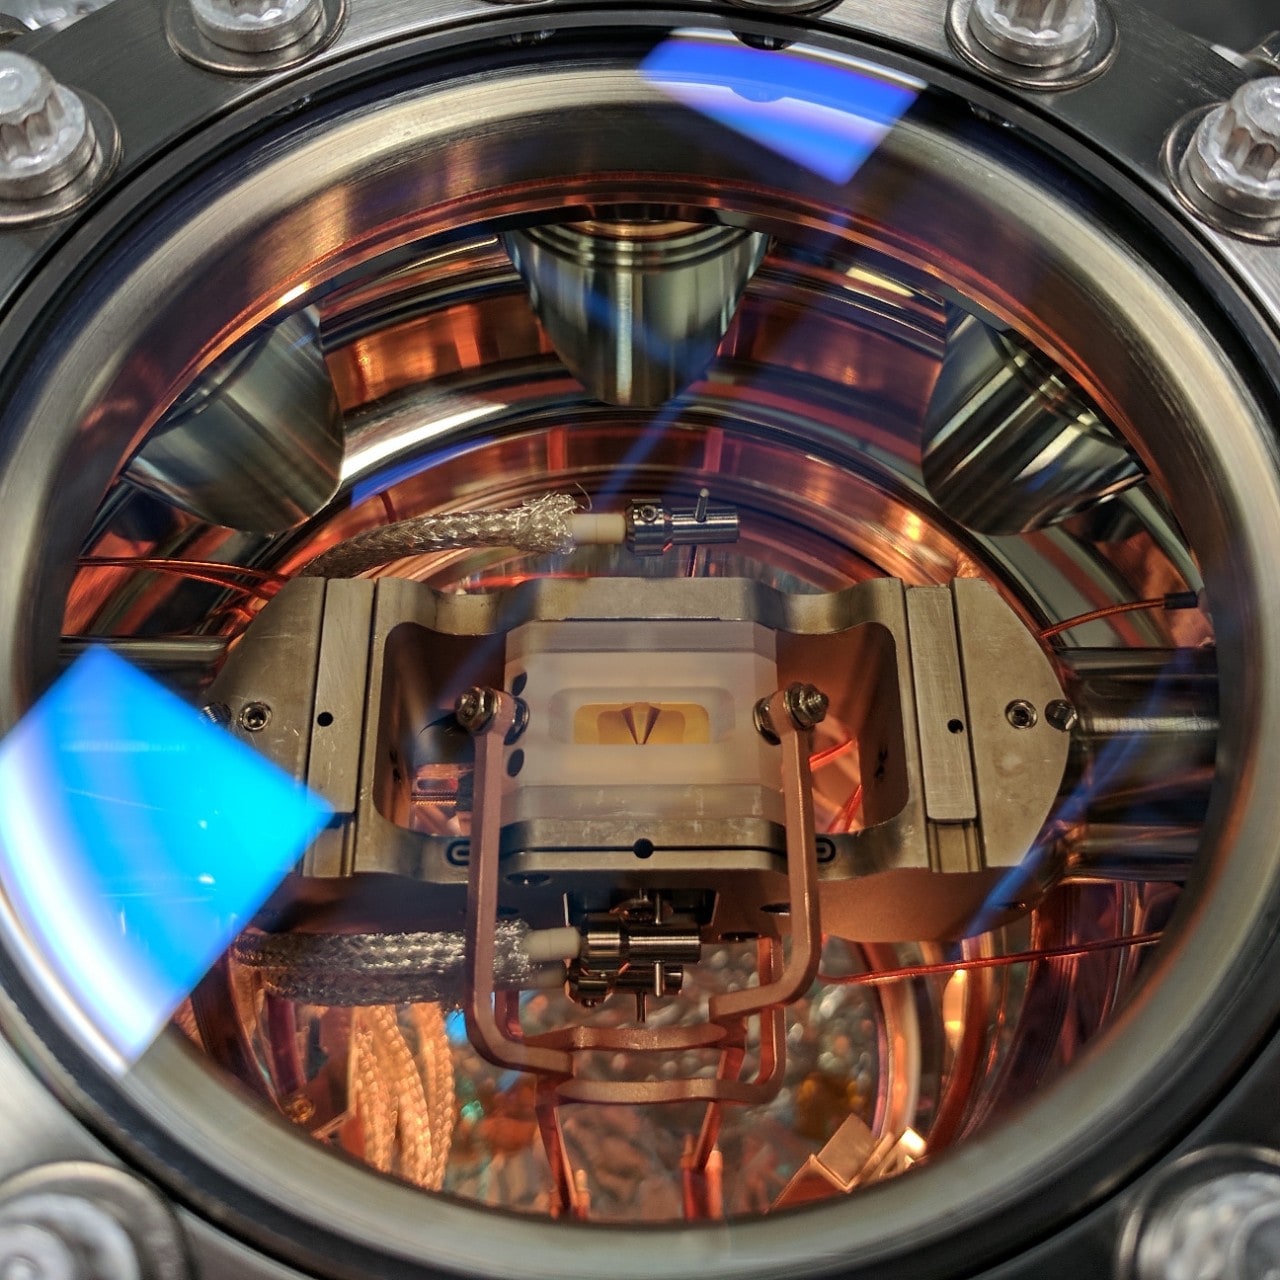 An ion trap at the University of Sydney's Quantum Control Laboratory. Ion traps are used to confine individual atoms for experiments in quantum control and quantum computing. Credit: Professor Michael Biercuk